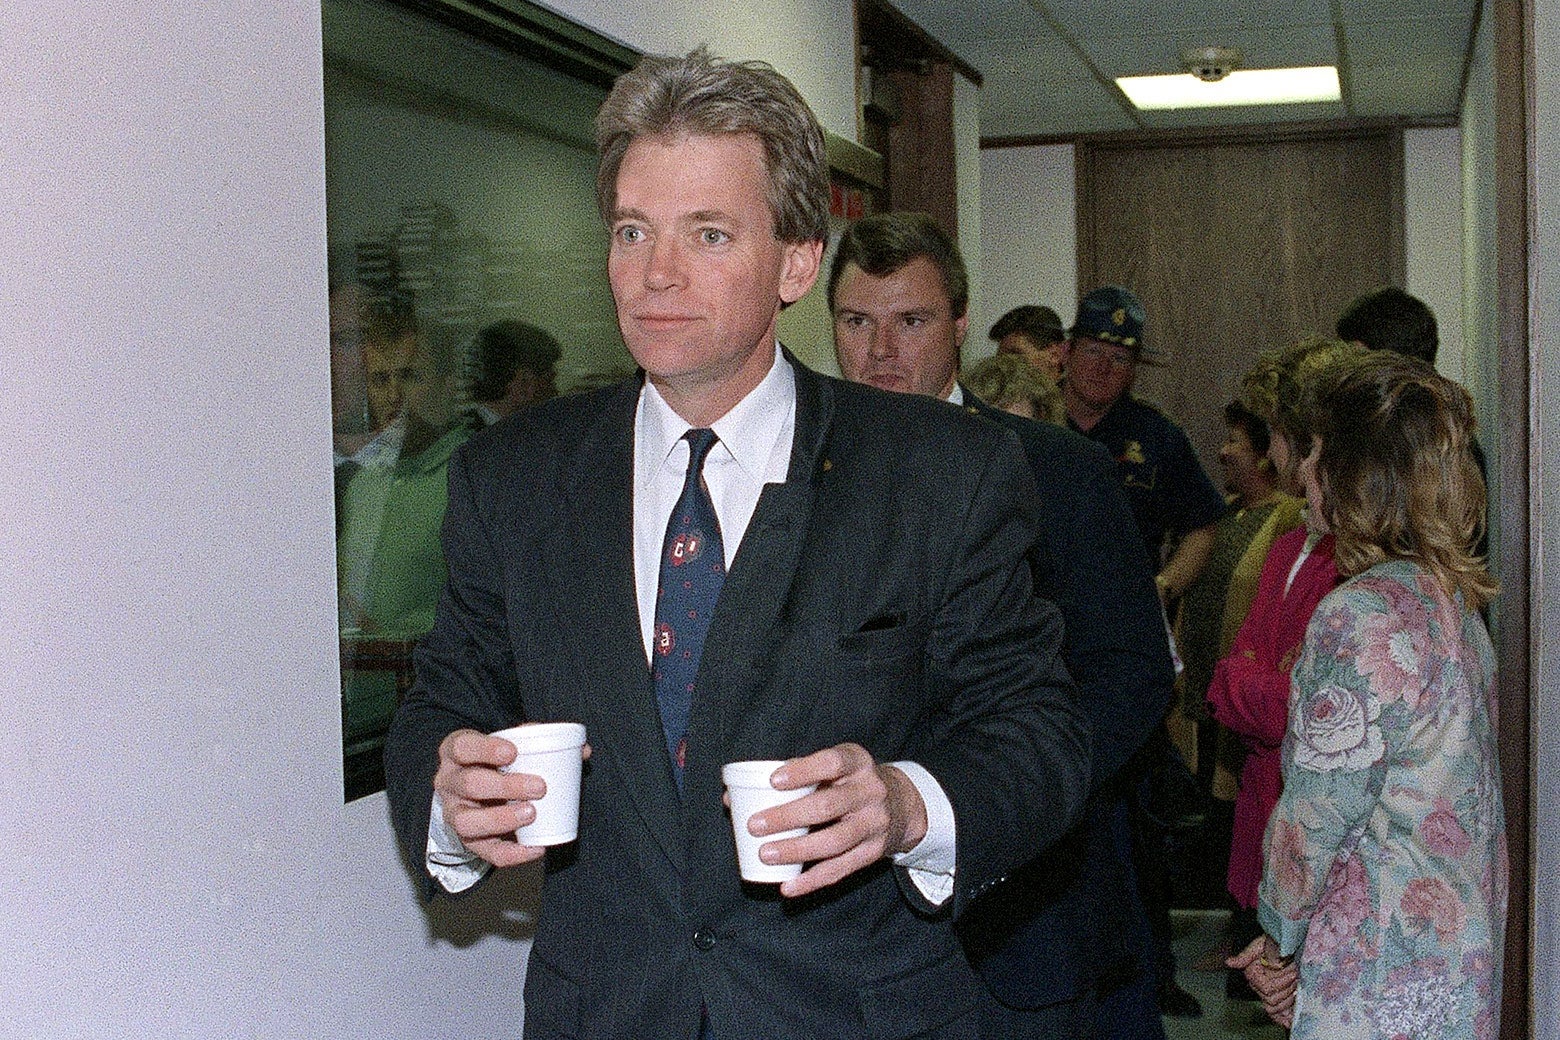 David Duke carrying two little styrofoam cups. A radio studio is seen, along with people milling about, behind him.